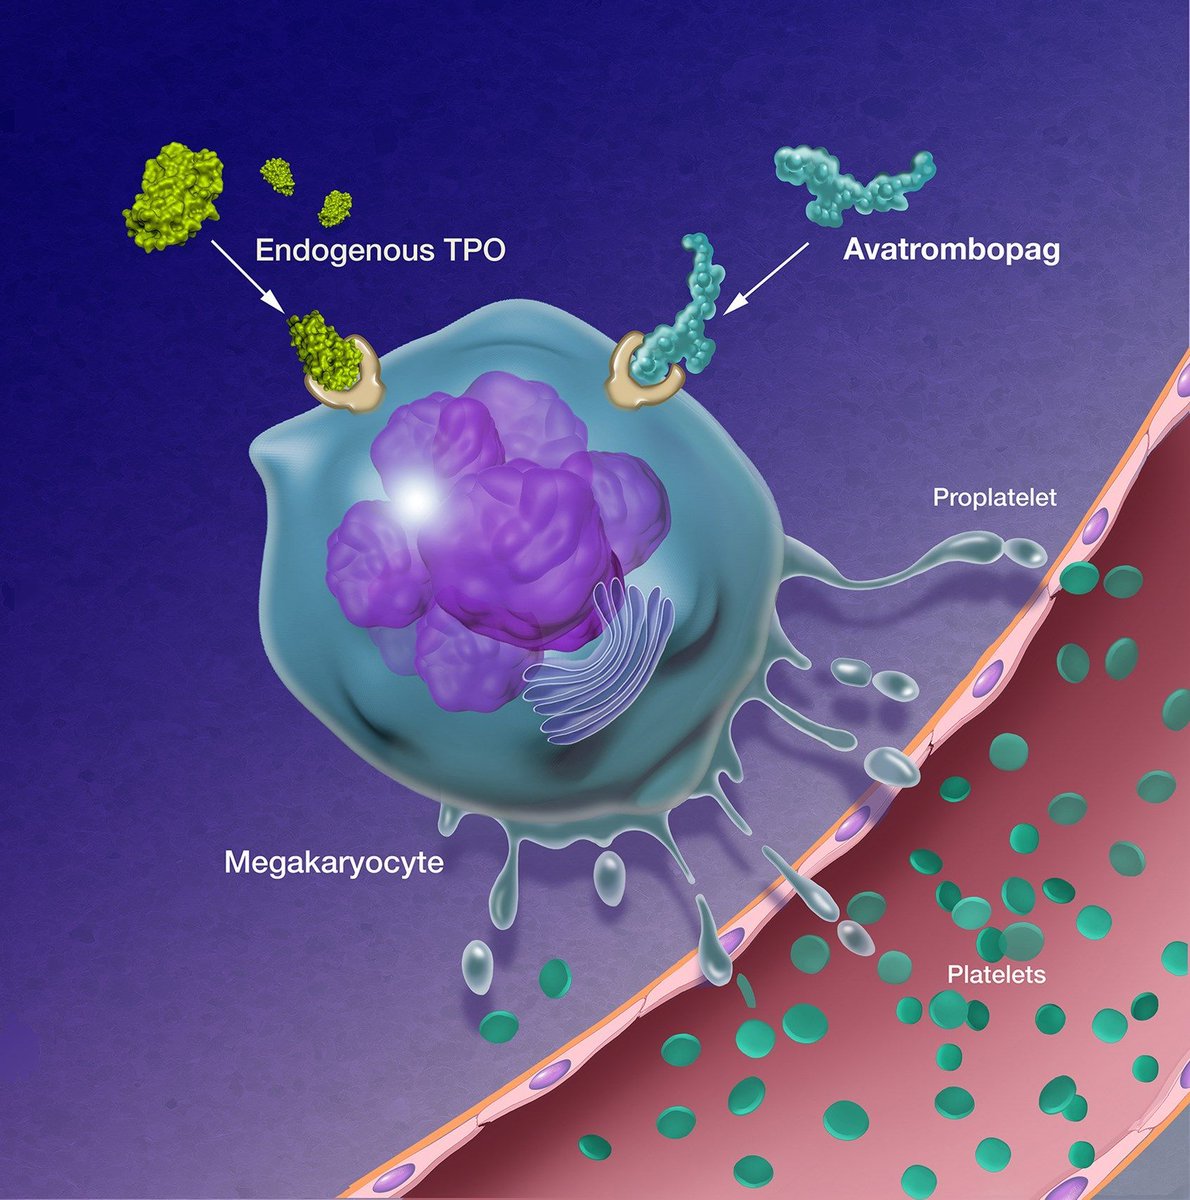 Illustration by Jackie Heda of Avatrombopag, 'an investigational thrombopoietin-receptor agonist, is effective in persistent and chronic immune thrombocytopenia and stimulates platelet production.'

Explore more: buff.ly/3m8owzK 

#immunology #medicalillustration #sciart